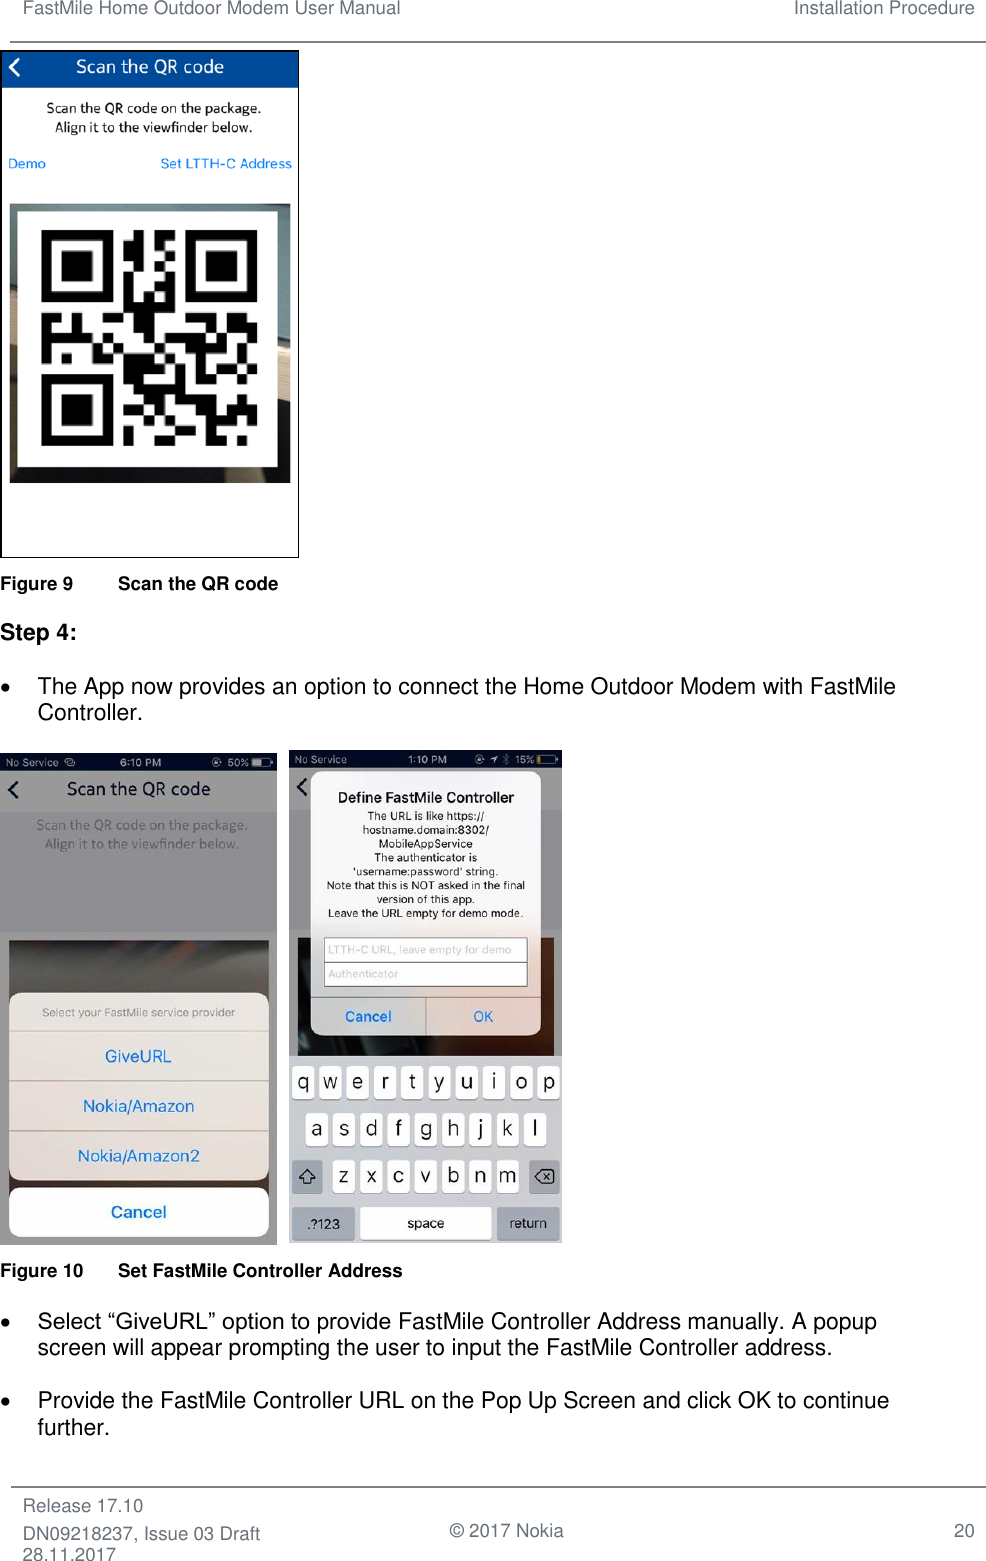 FastMile Home Outdoor Modem User Manual Installation Procedure  Release 17.10 DN09218237, Issue 03 Draft 28.11.2017                                © 2017 Nokia 20    Figure 9  Scan the QR code Step 4: •  The App now provides an option to connect the Home Outdoor Modem with FastMile Controller.     Figure 10  Set FastMile Controller Address • Select “GiveURL” option to provide FastMile Controller Address manually. A popup screen will appear prompting the user to input the FastMile Controller address. •  Provide the FastMile Controller URL on the Pop Up Screen and click OK to continue further. 